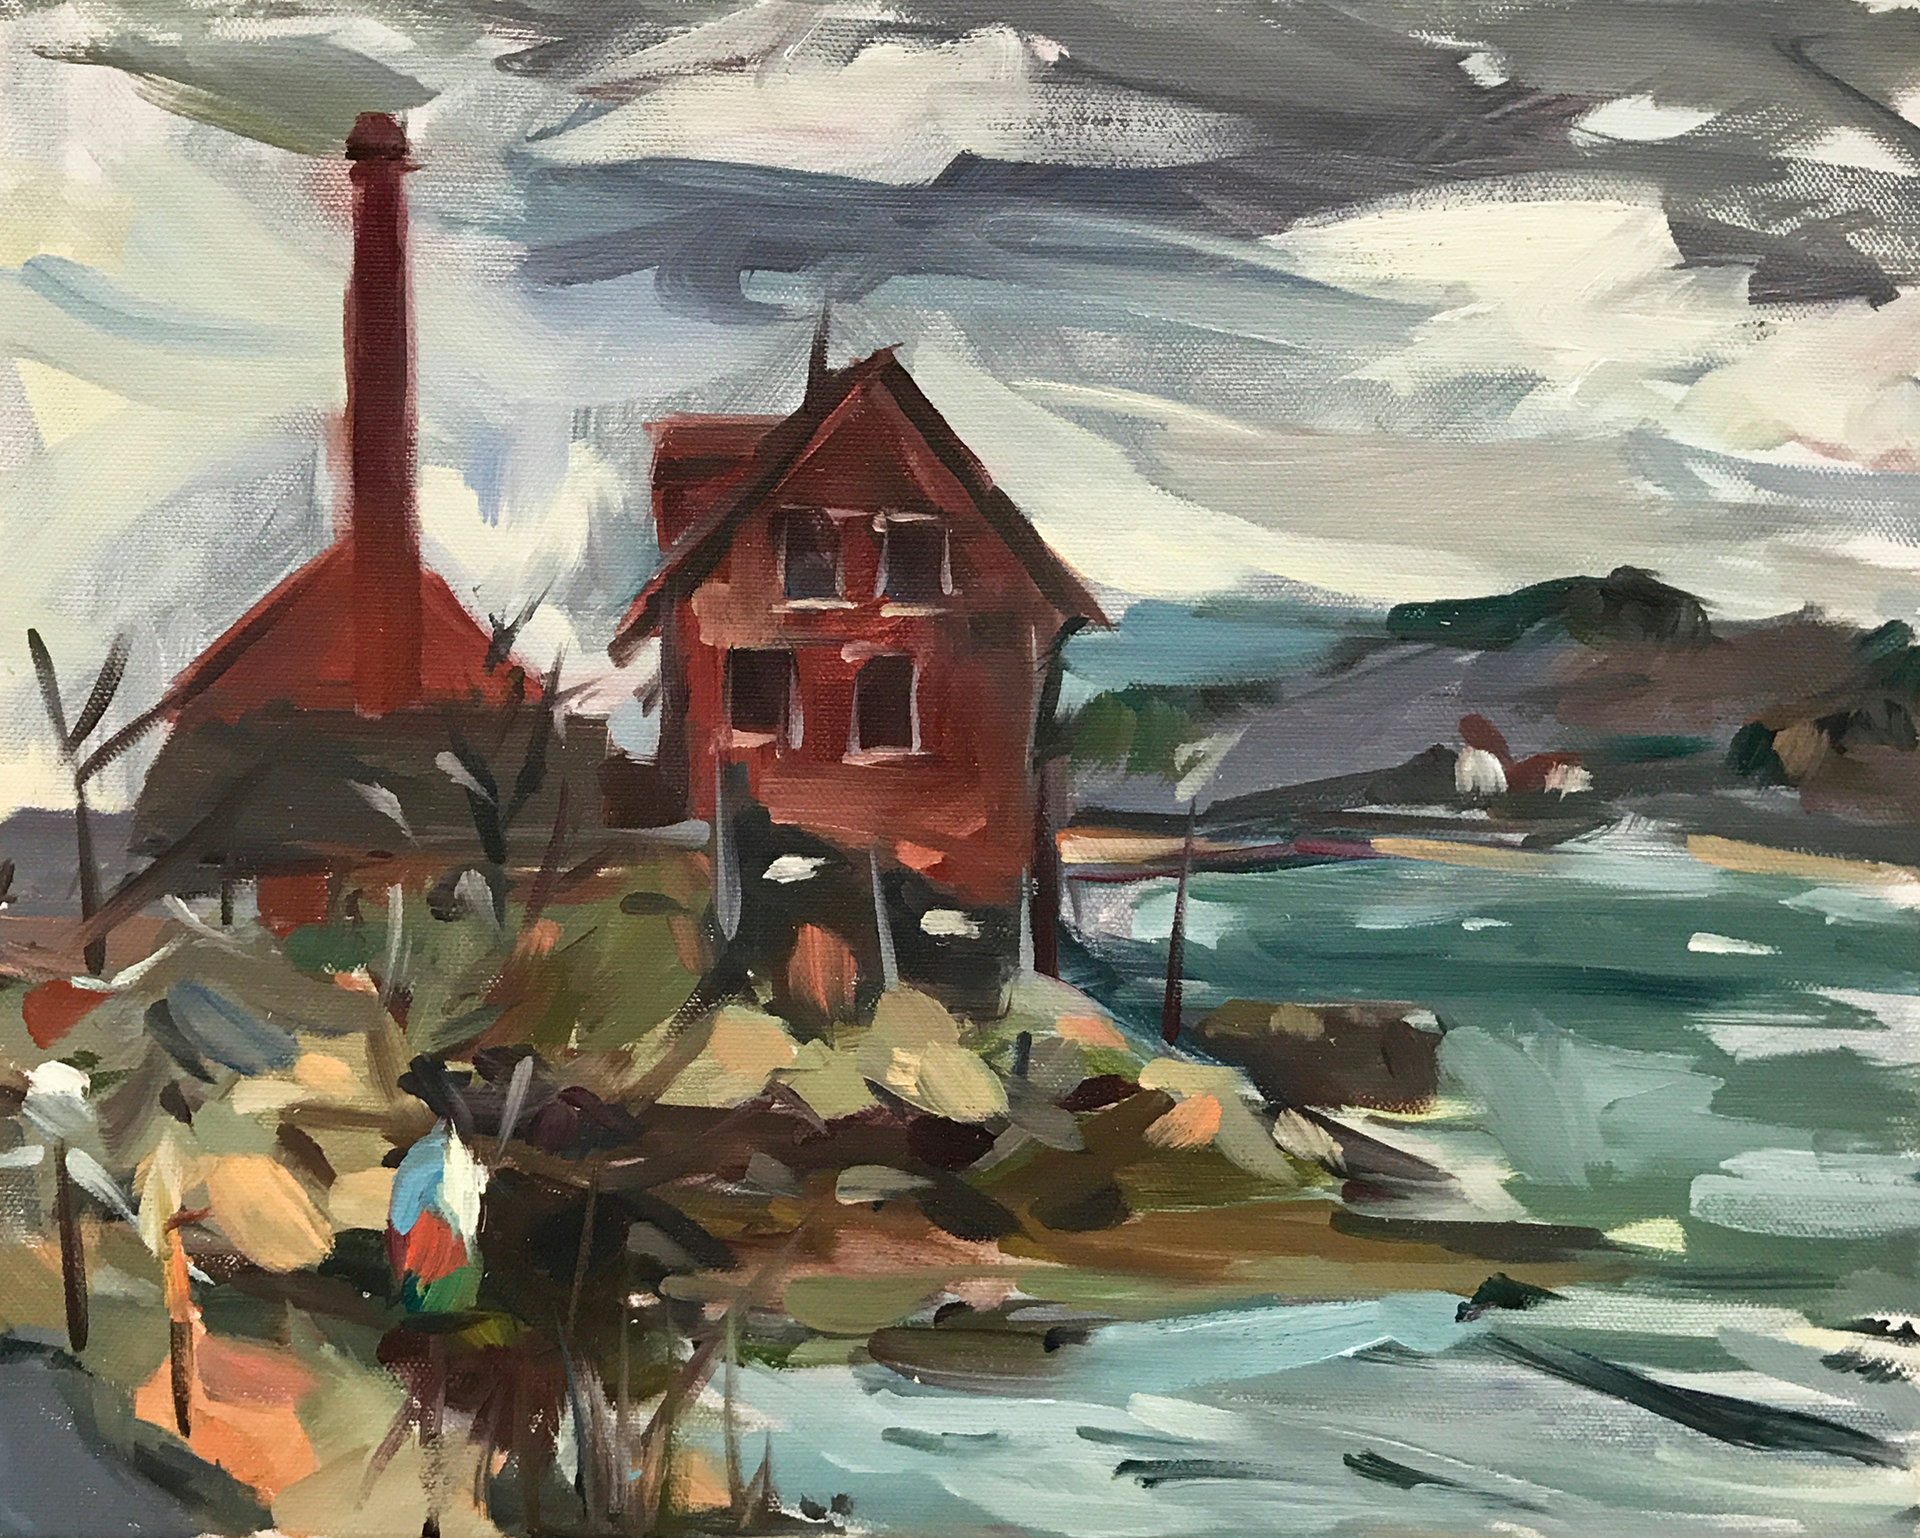 Paint Factory on a Windy Day by Vanessa Michalak